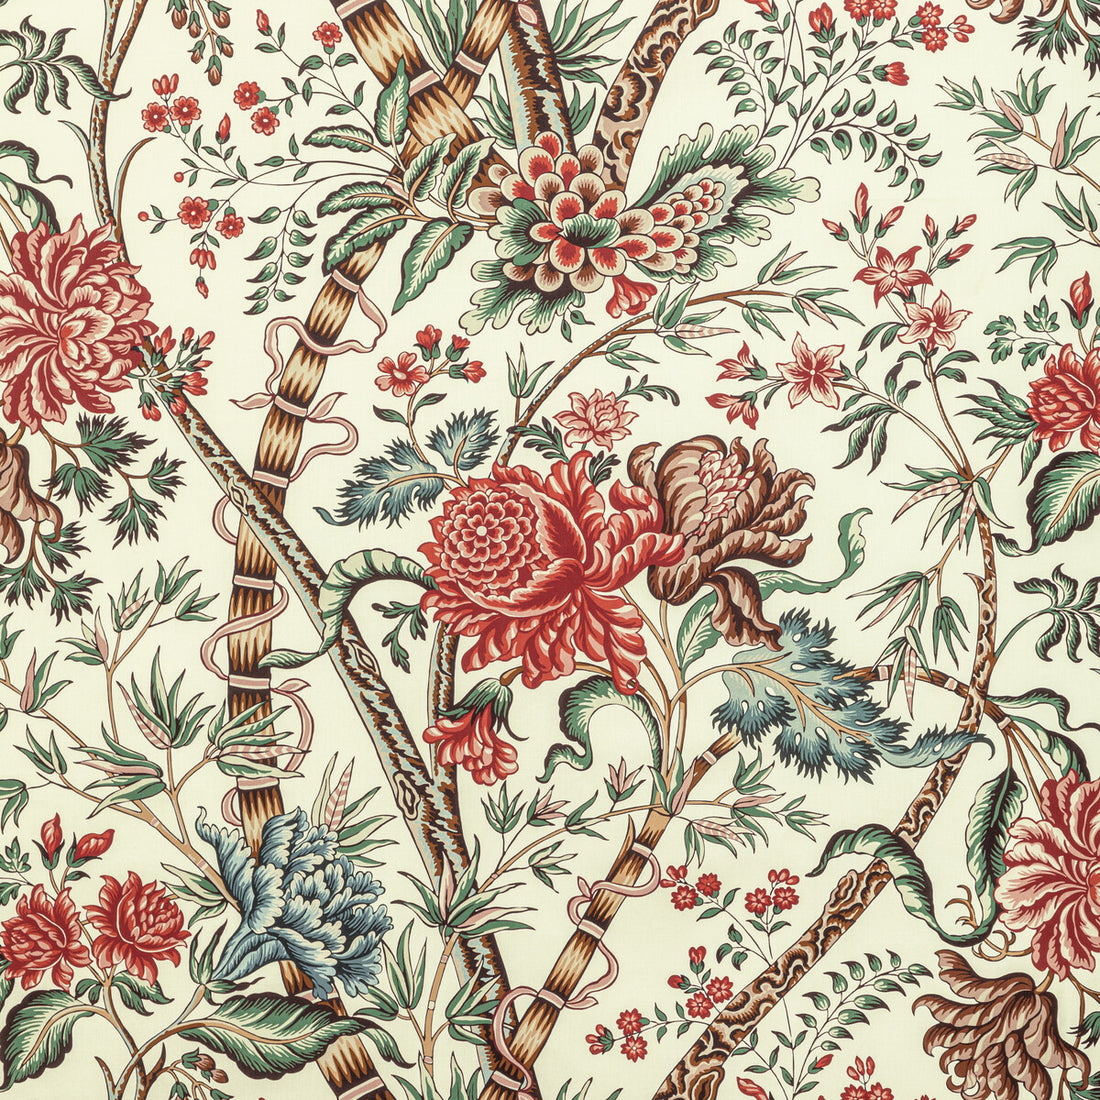 Luberon Print fabric in red/teal color - pattern 8022100.1913.0 - by Brunschwig &amp; Fils in the Manoir collection